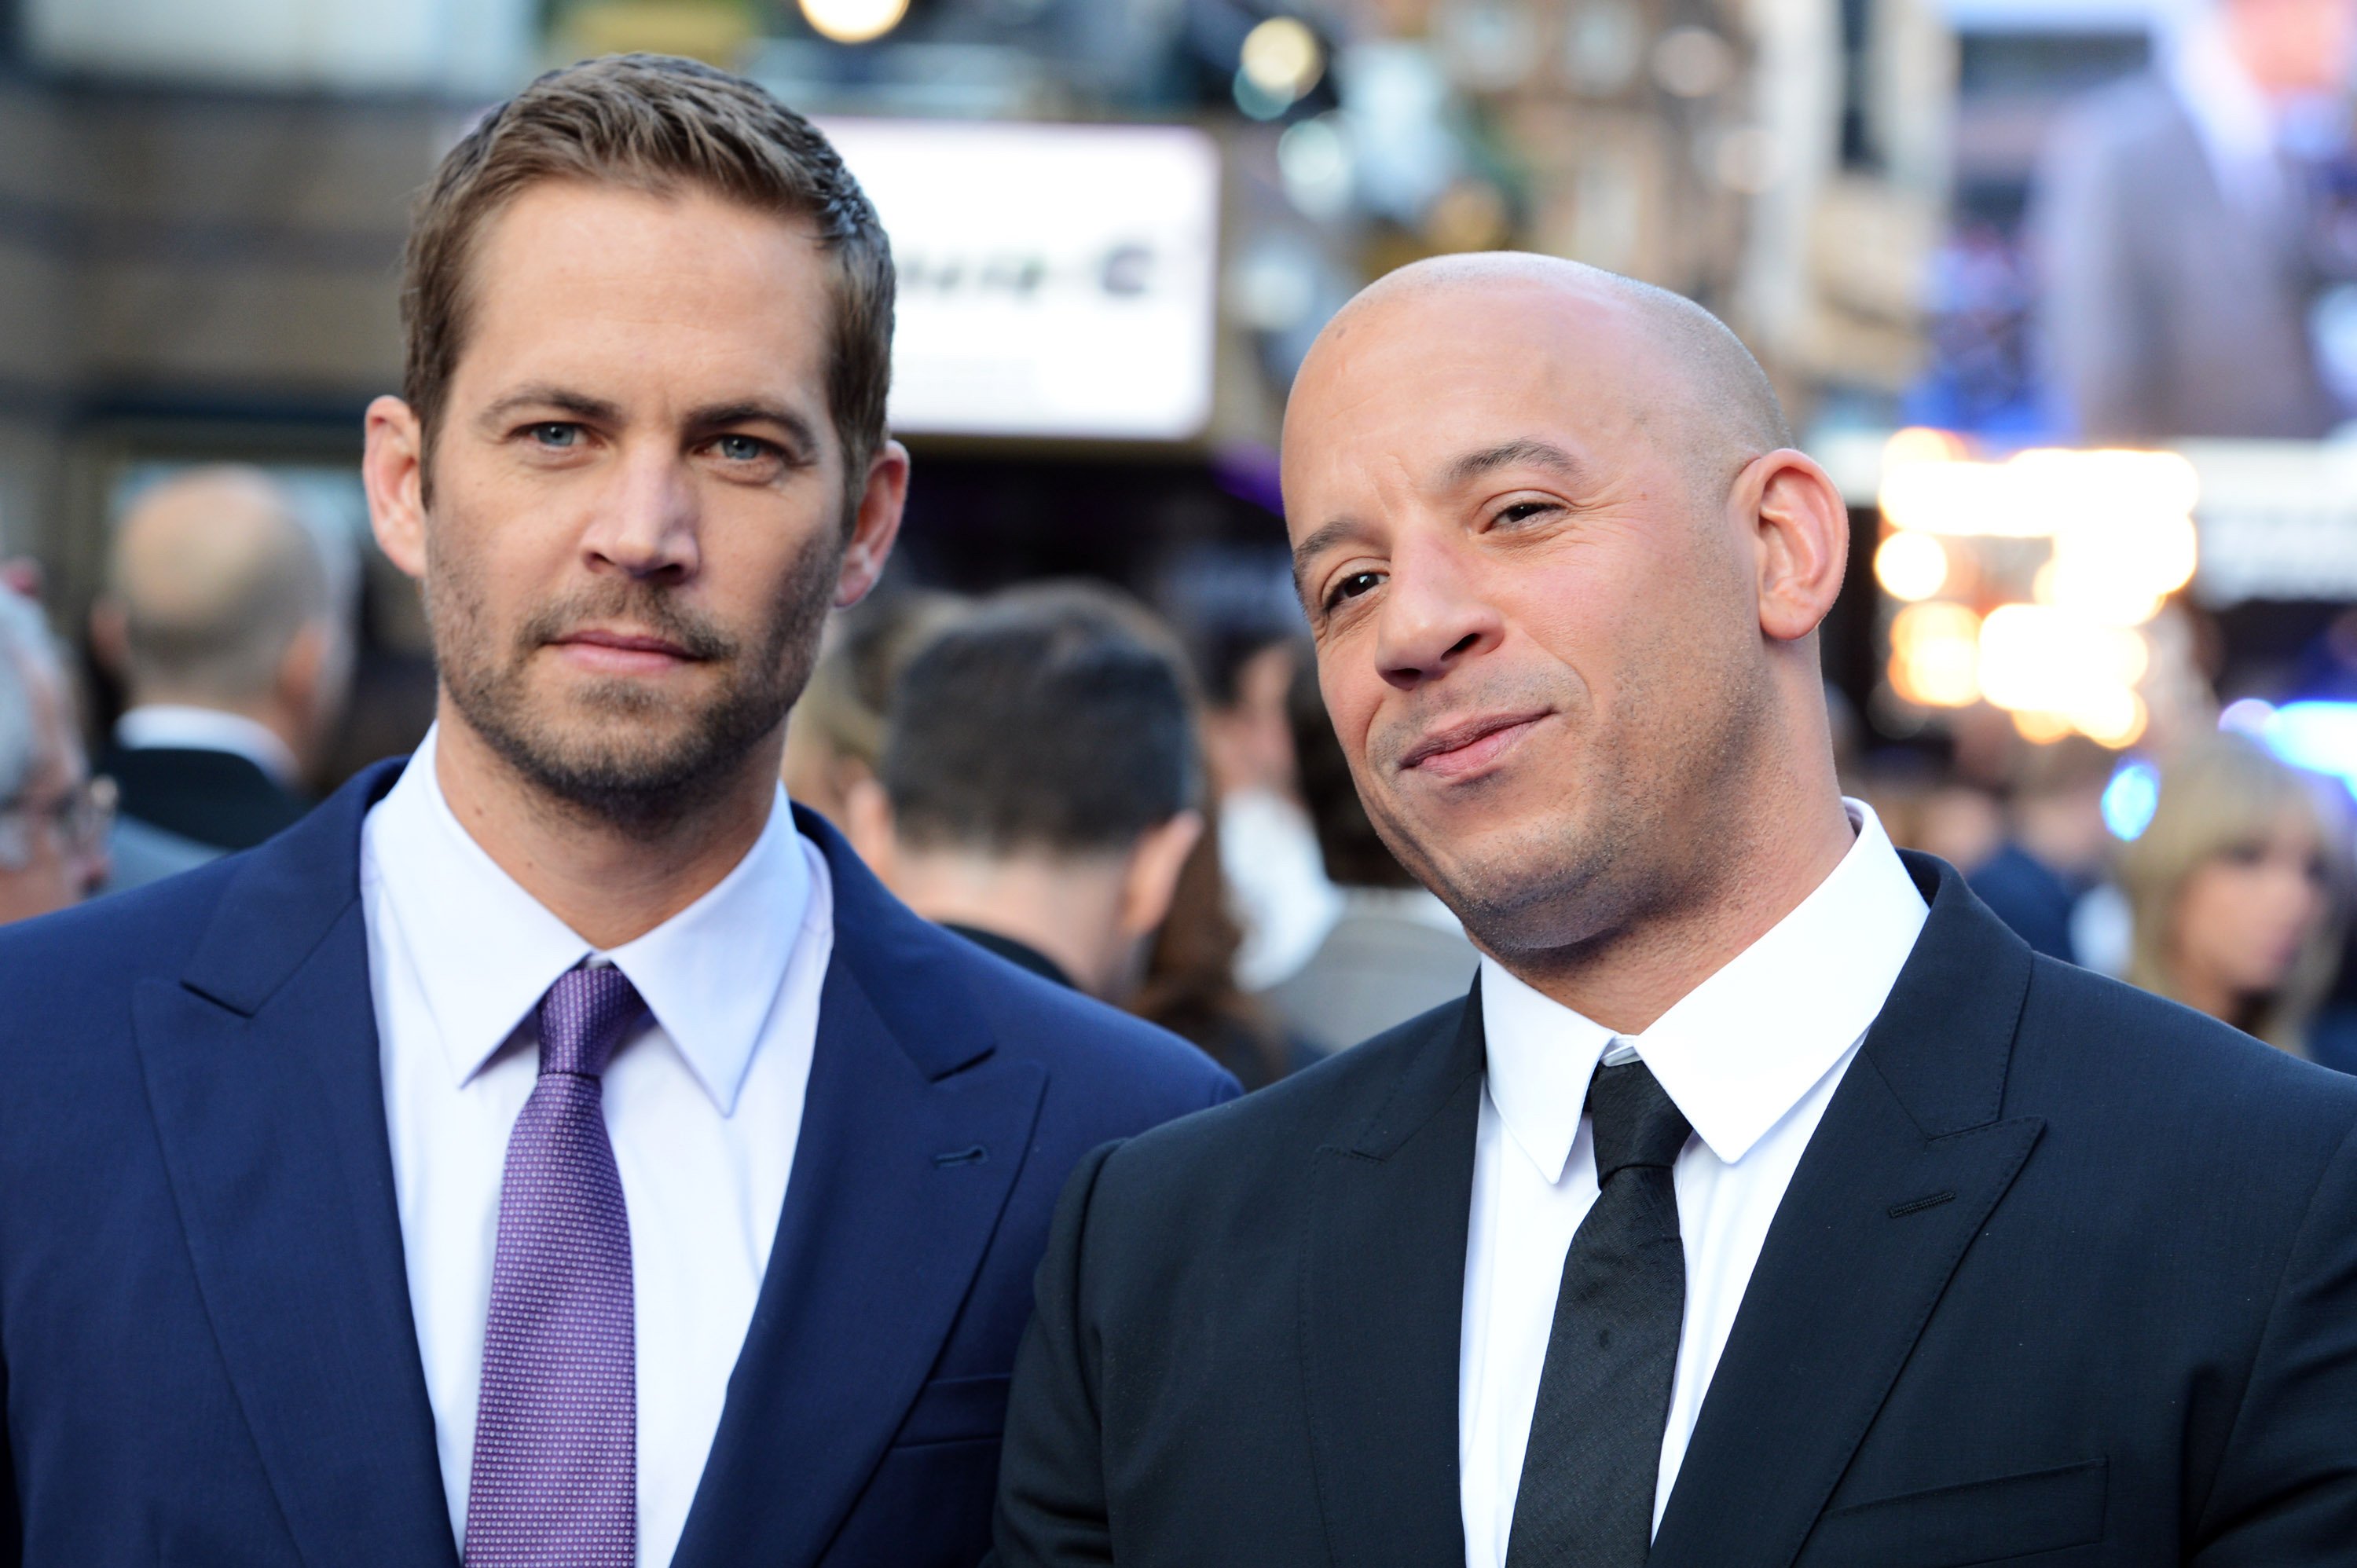 Paul Walker and Vin Diesel at the 'Fast and Furious 6' premiere